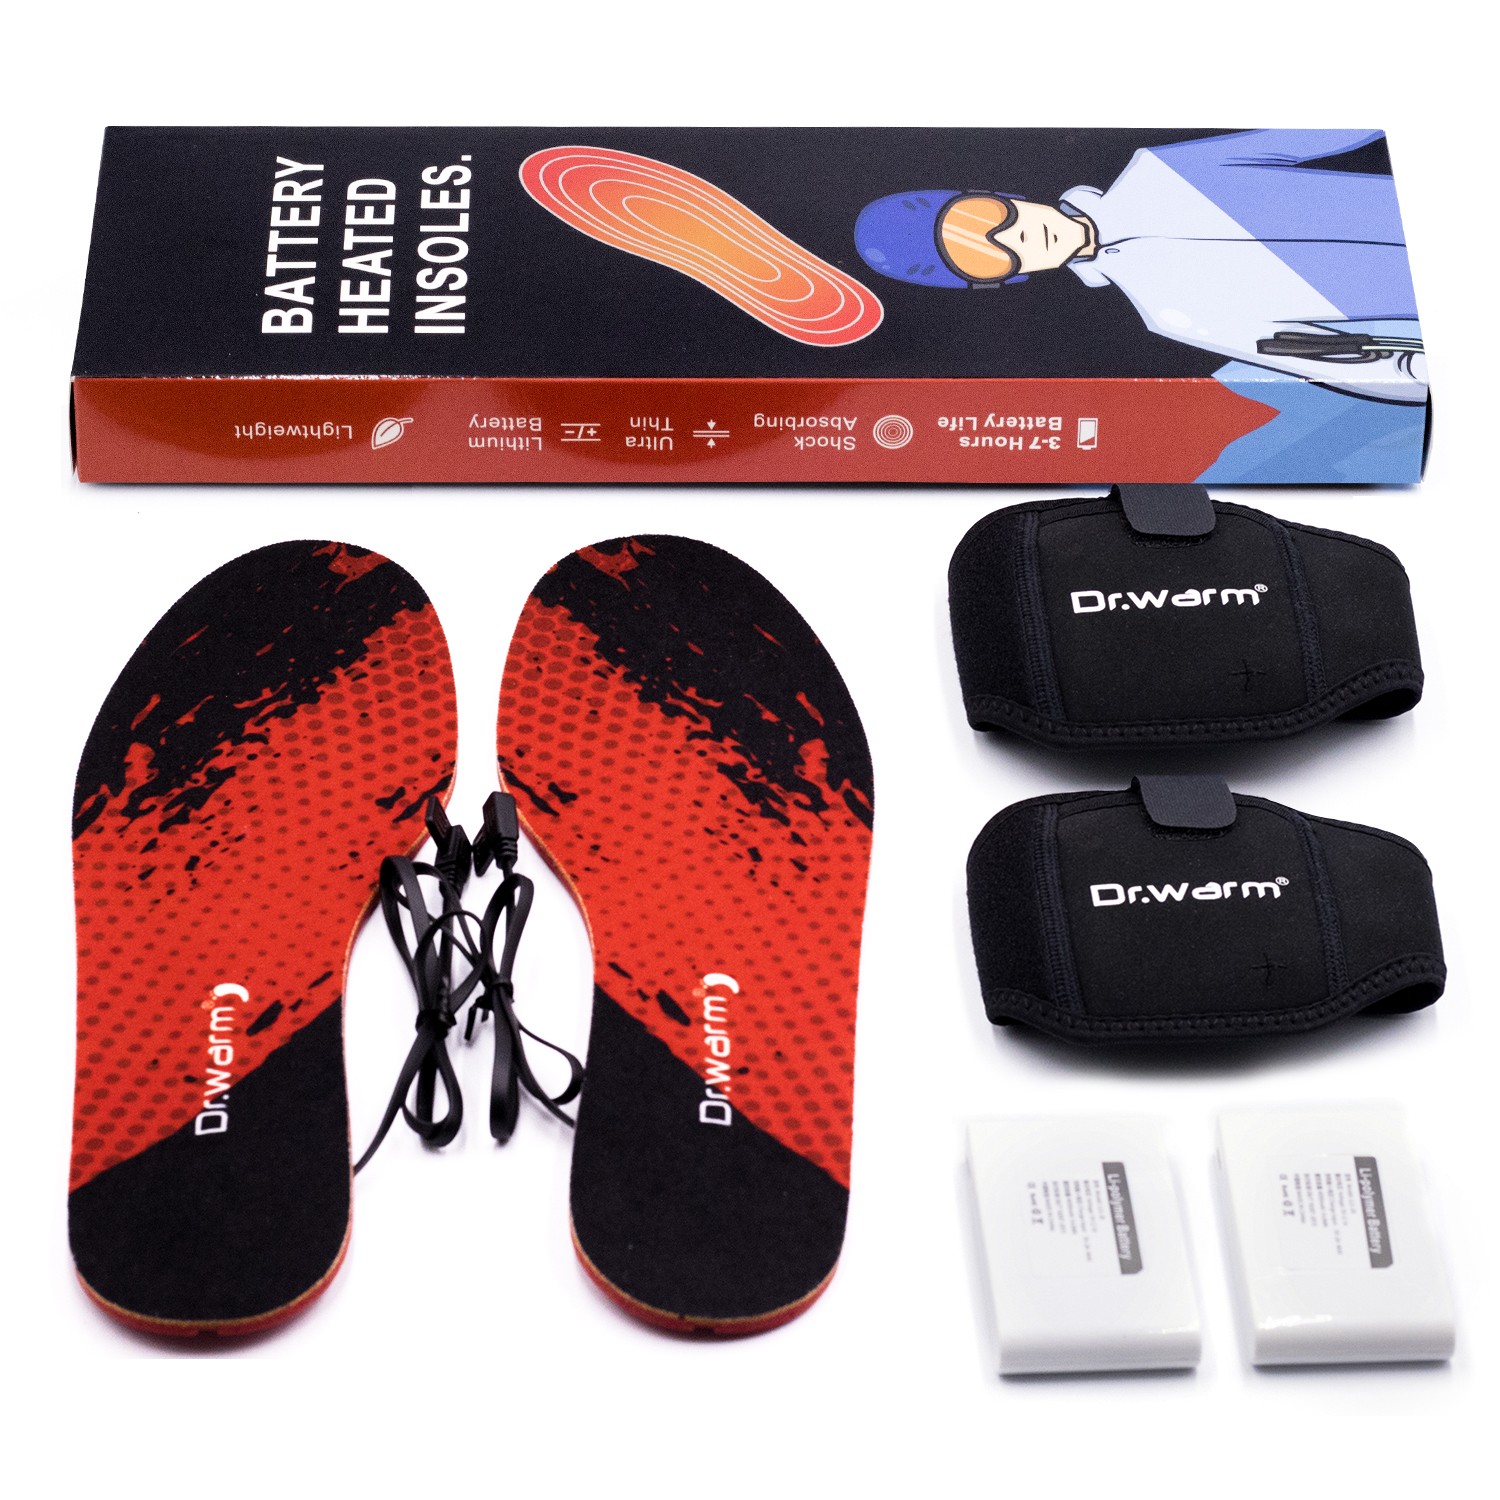 Dr. Warm warm insoles for shoes-22